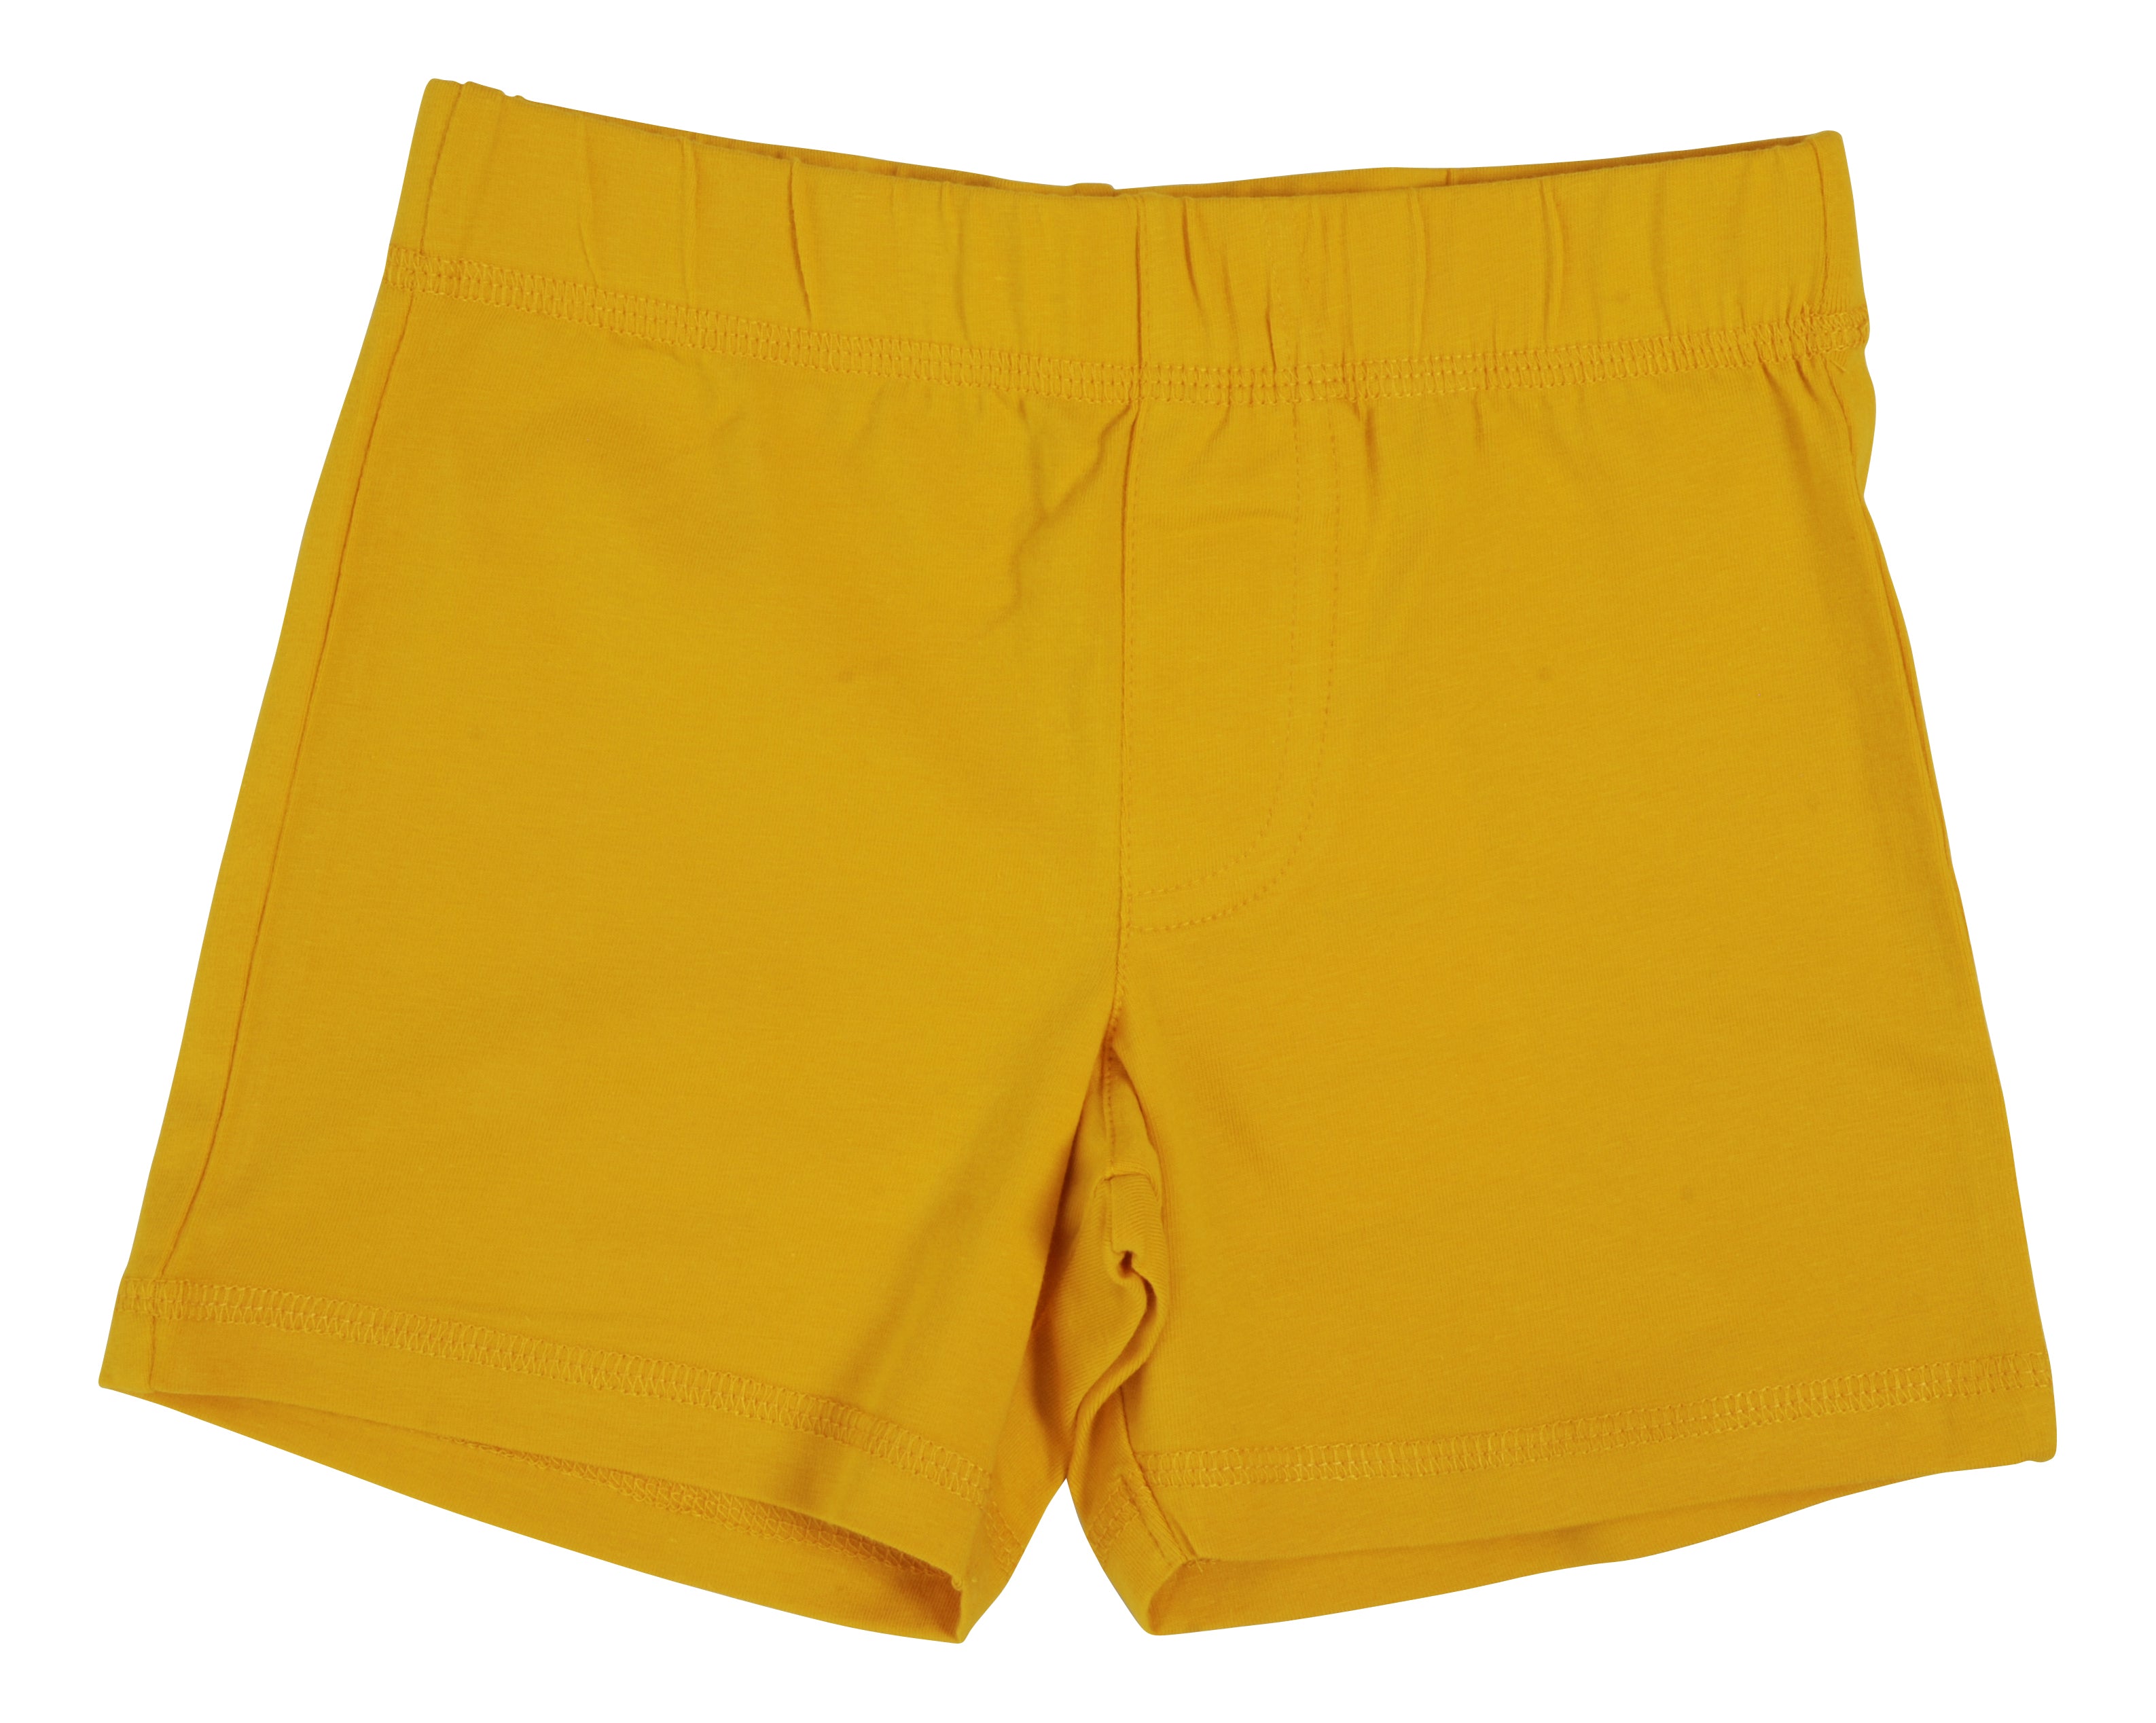 More Than A Fling - Shorts - Old Gold